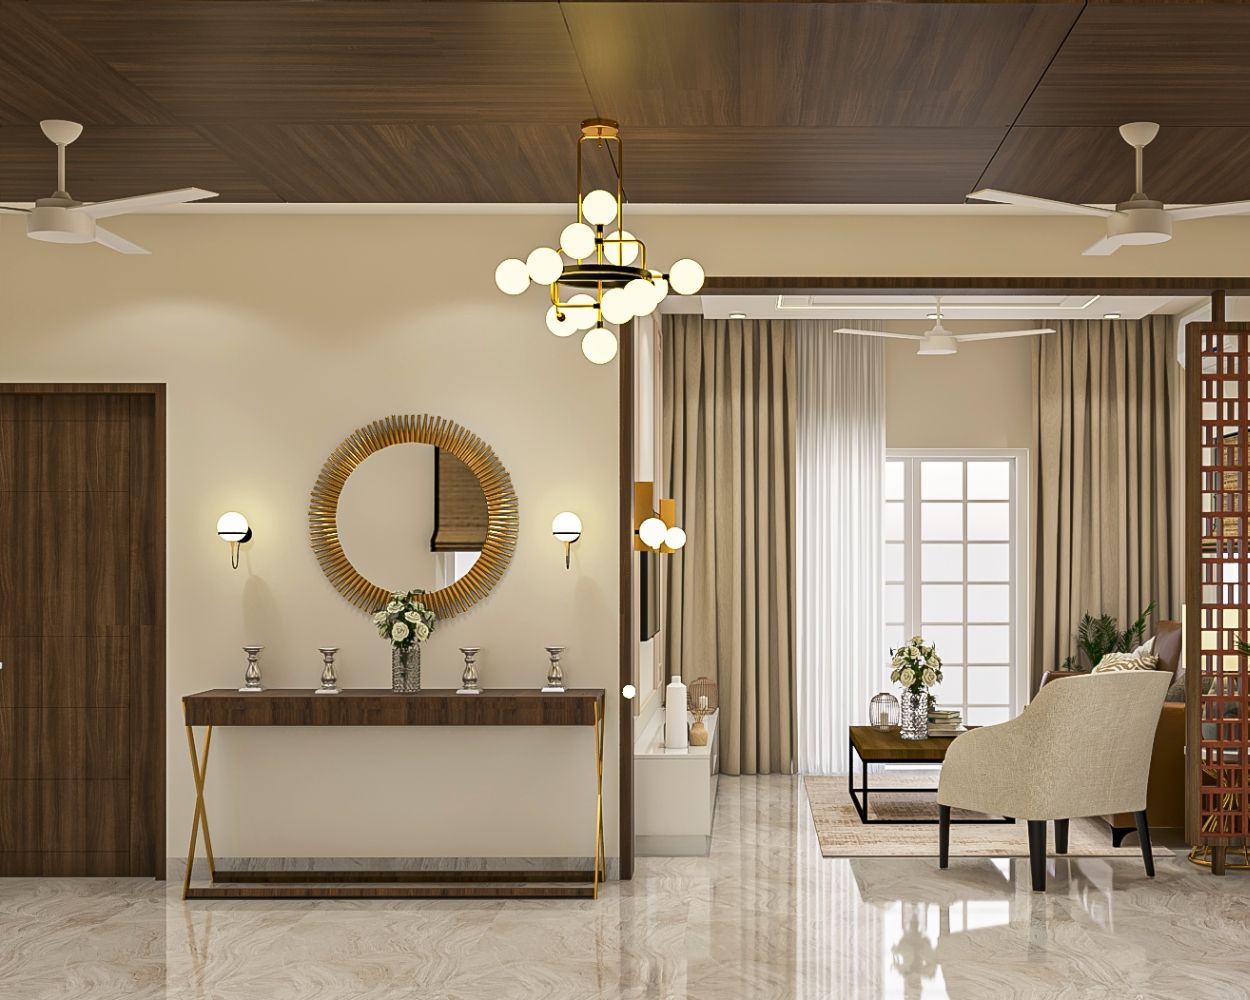 Contemporary Foyer Design With Wooden Console Table And Gold-Framed Circular Mirror